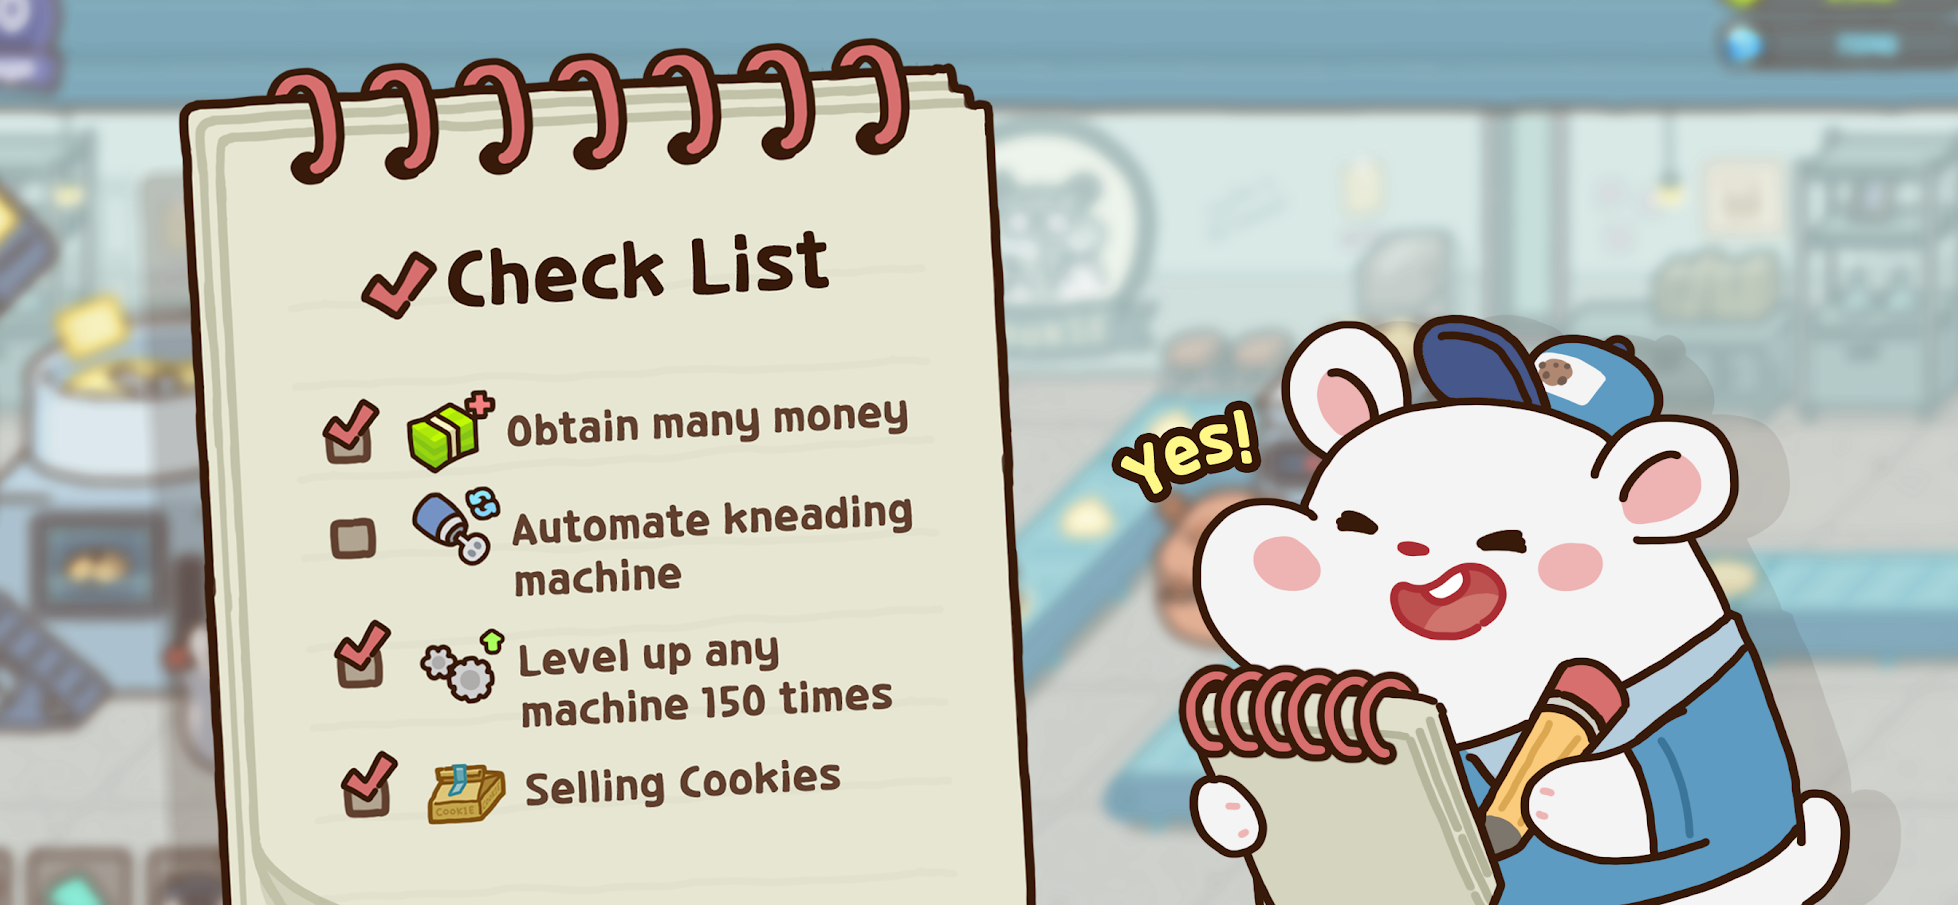 Hamster Cookie Factory – Tycoon Game v1.9.0 (Mod) APK